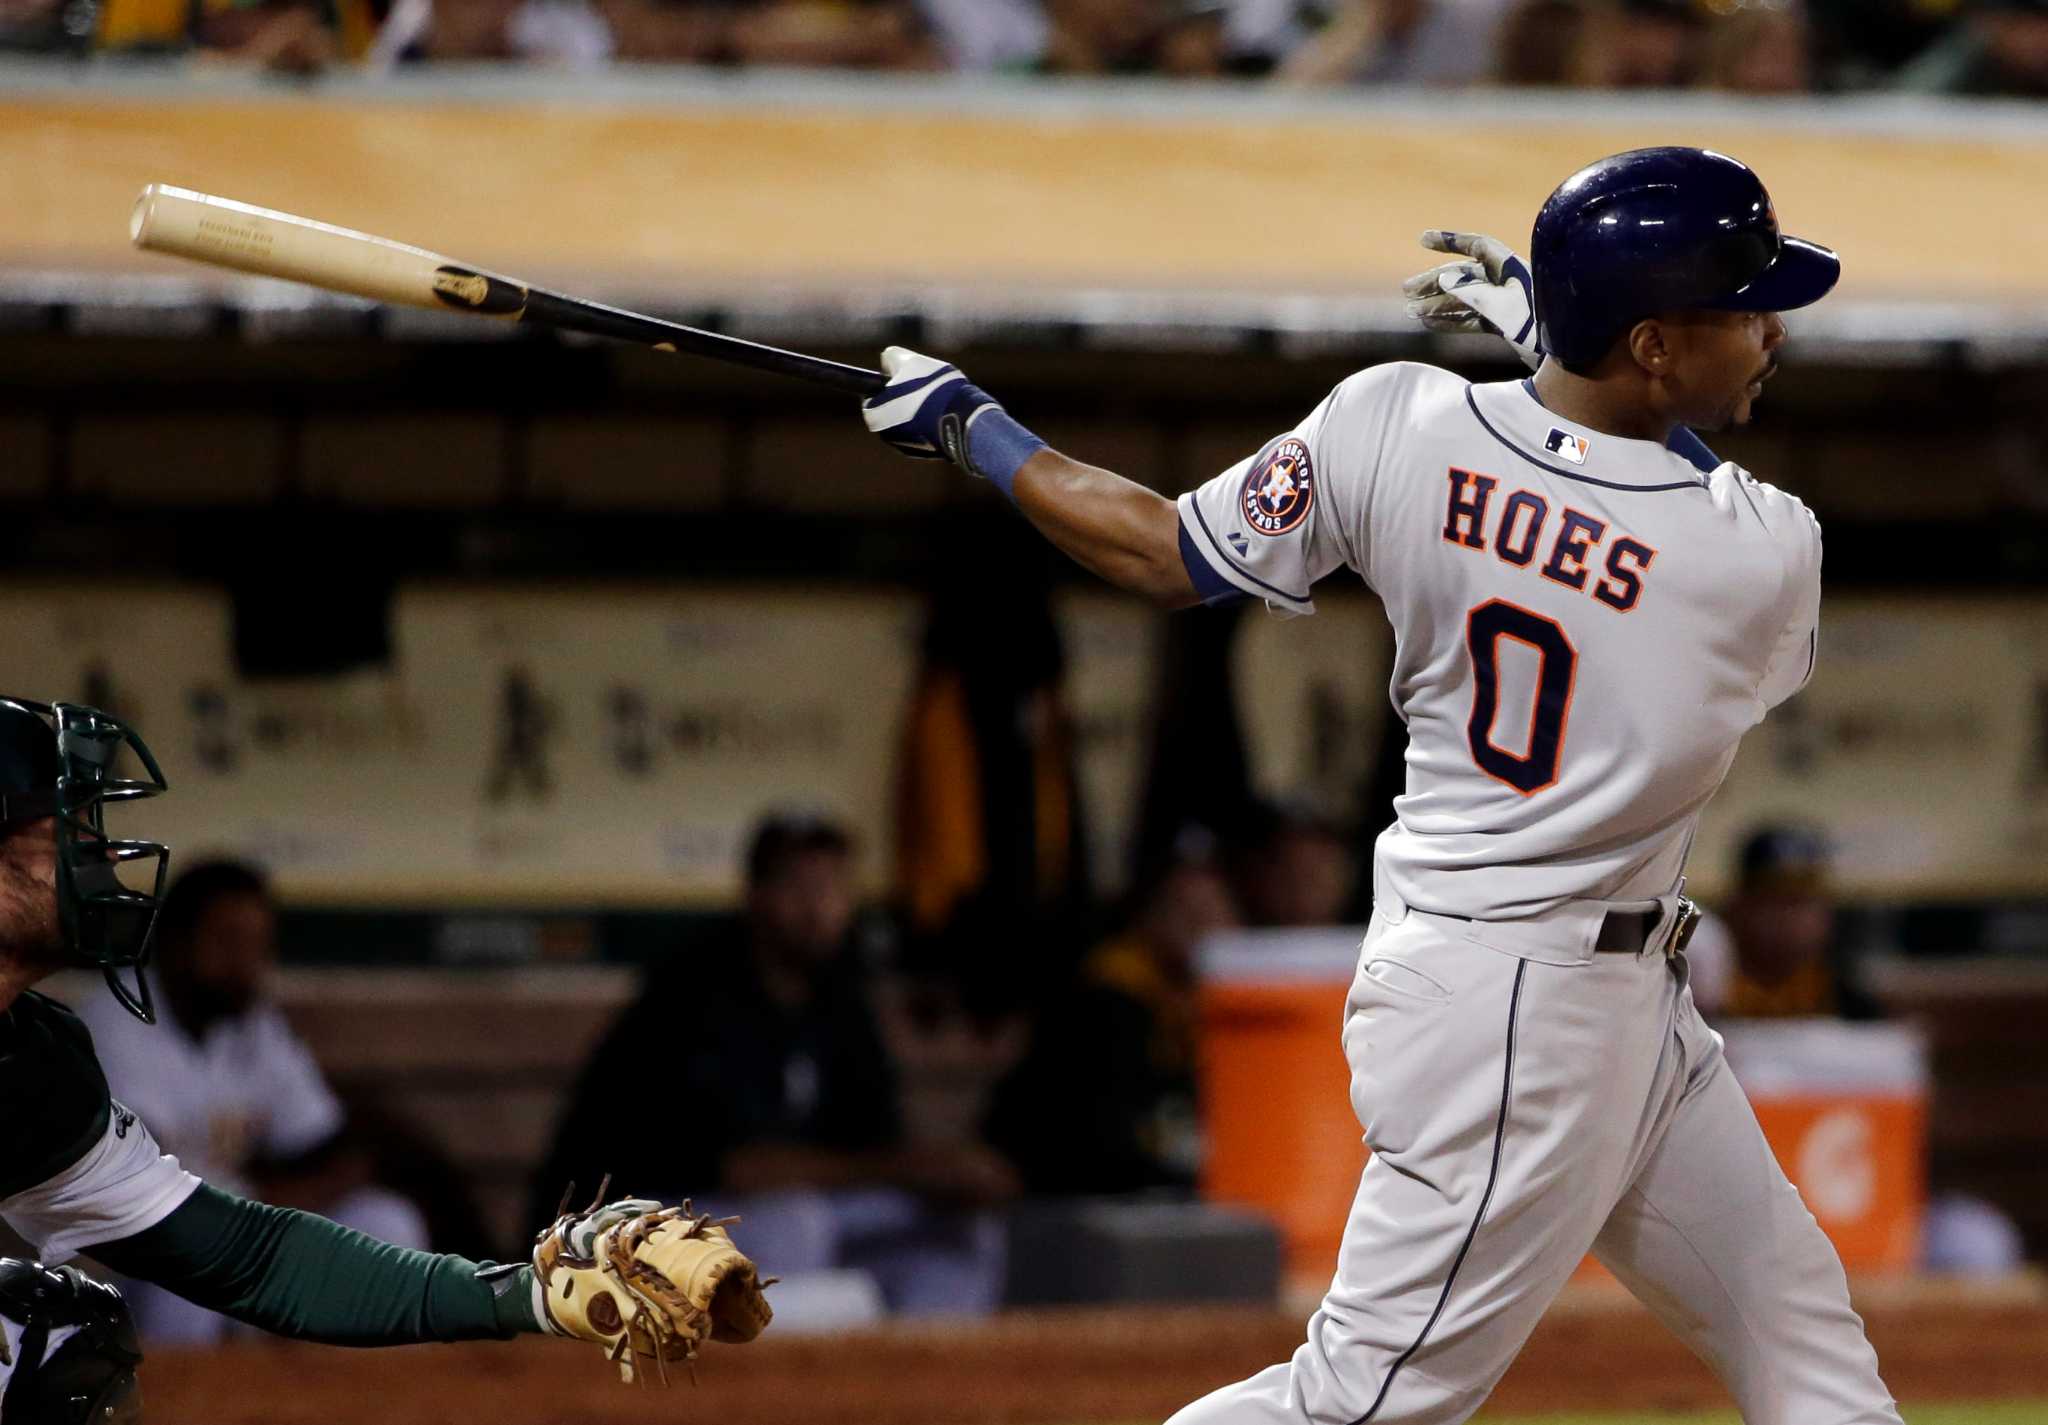 Astros report: Hoes gift-wraps home run for mom